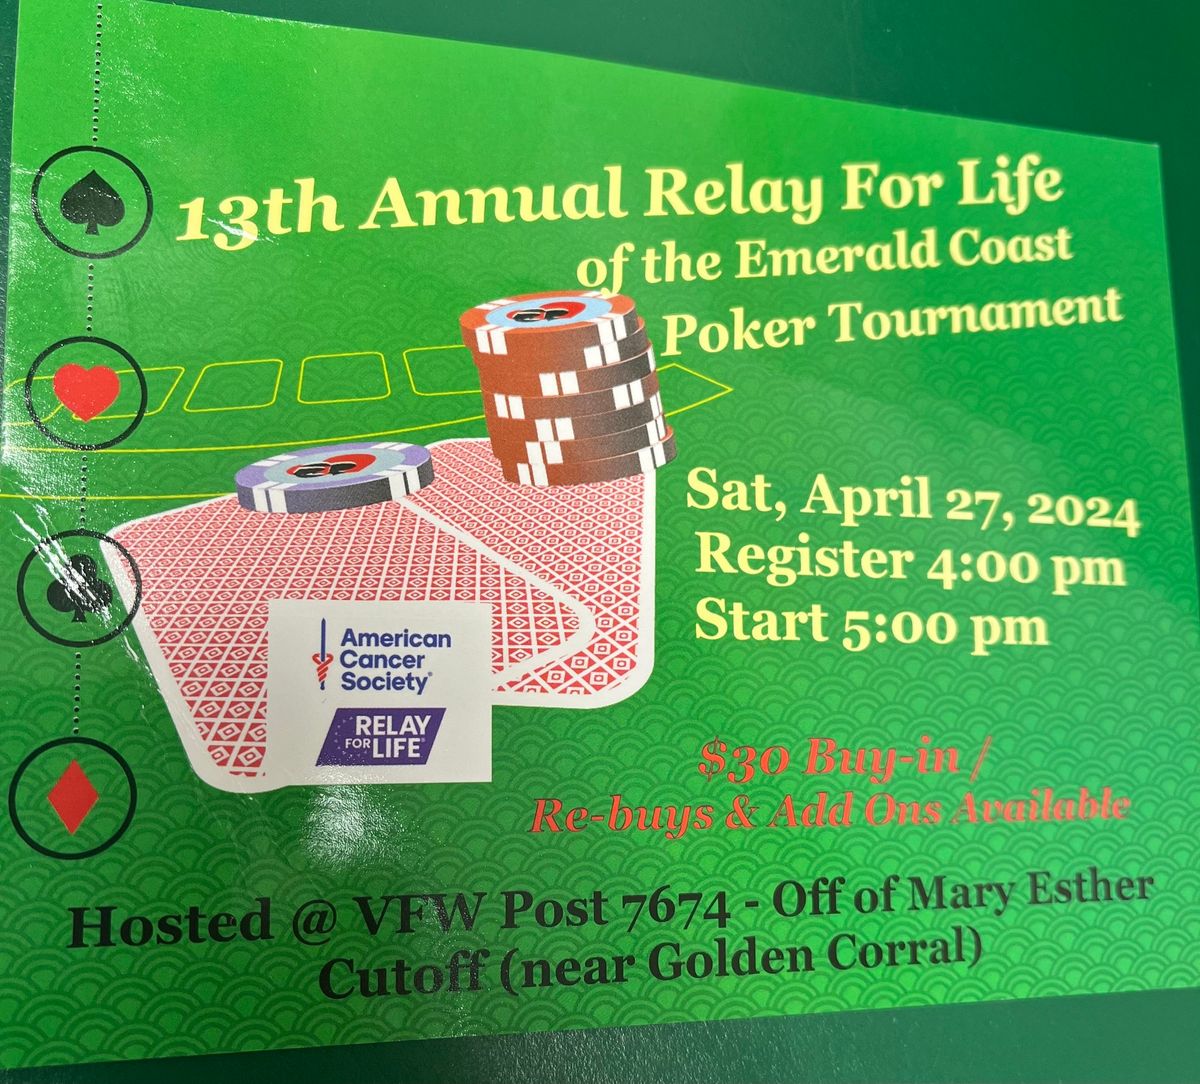 Annual Relay for Life-Poker